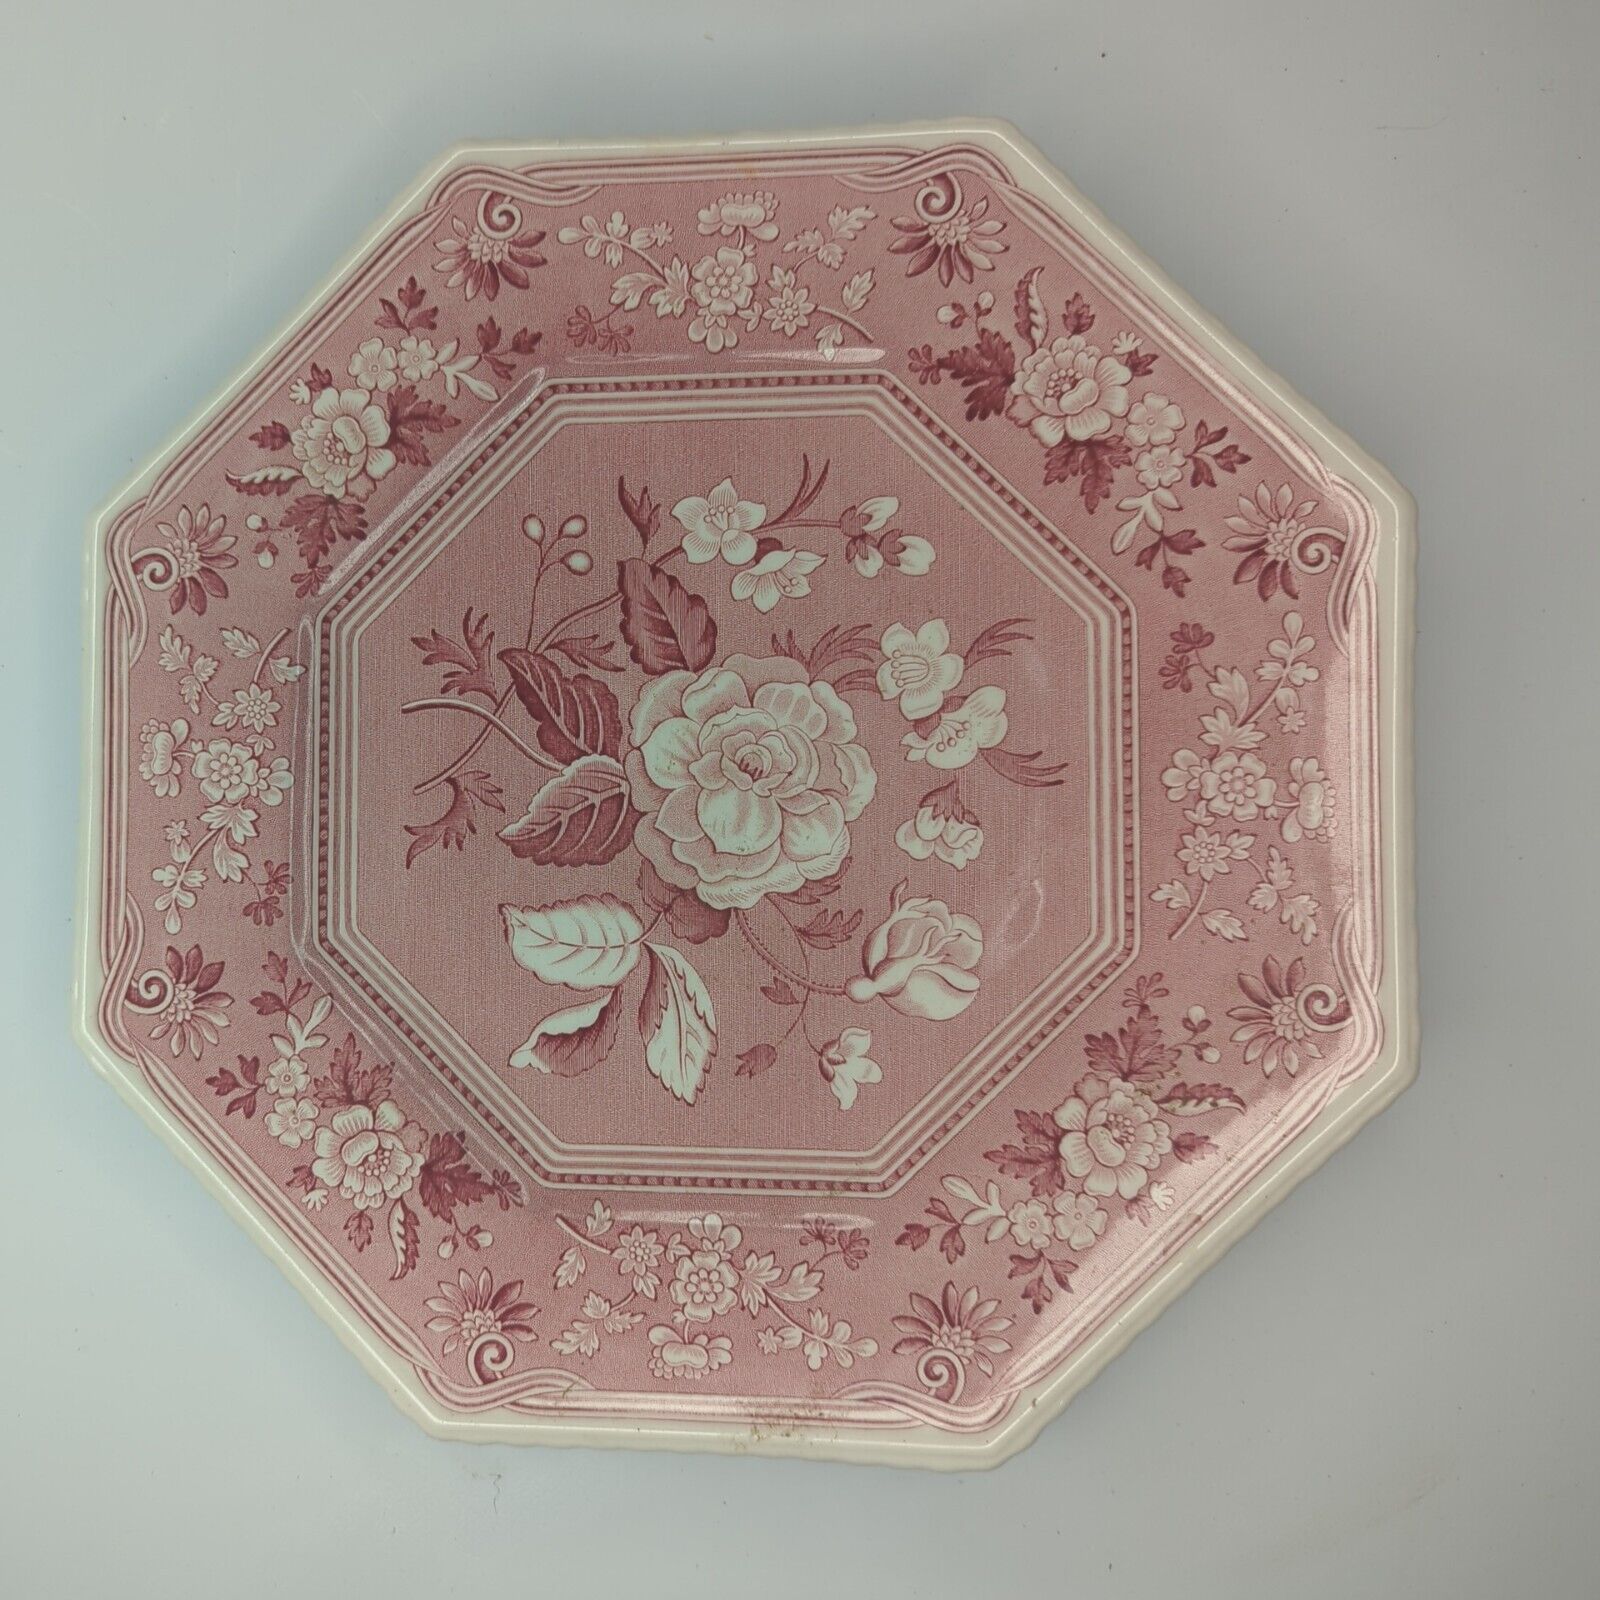 THE SPODE ARCHIVE SUTHERLAND COLLECTION BOTANICAL OCTAGONAL PINK FLORAL PLATE